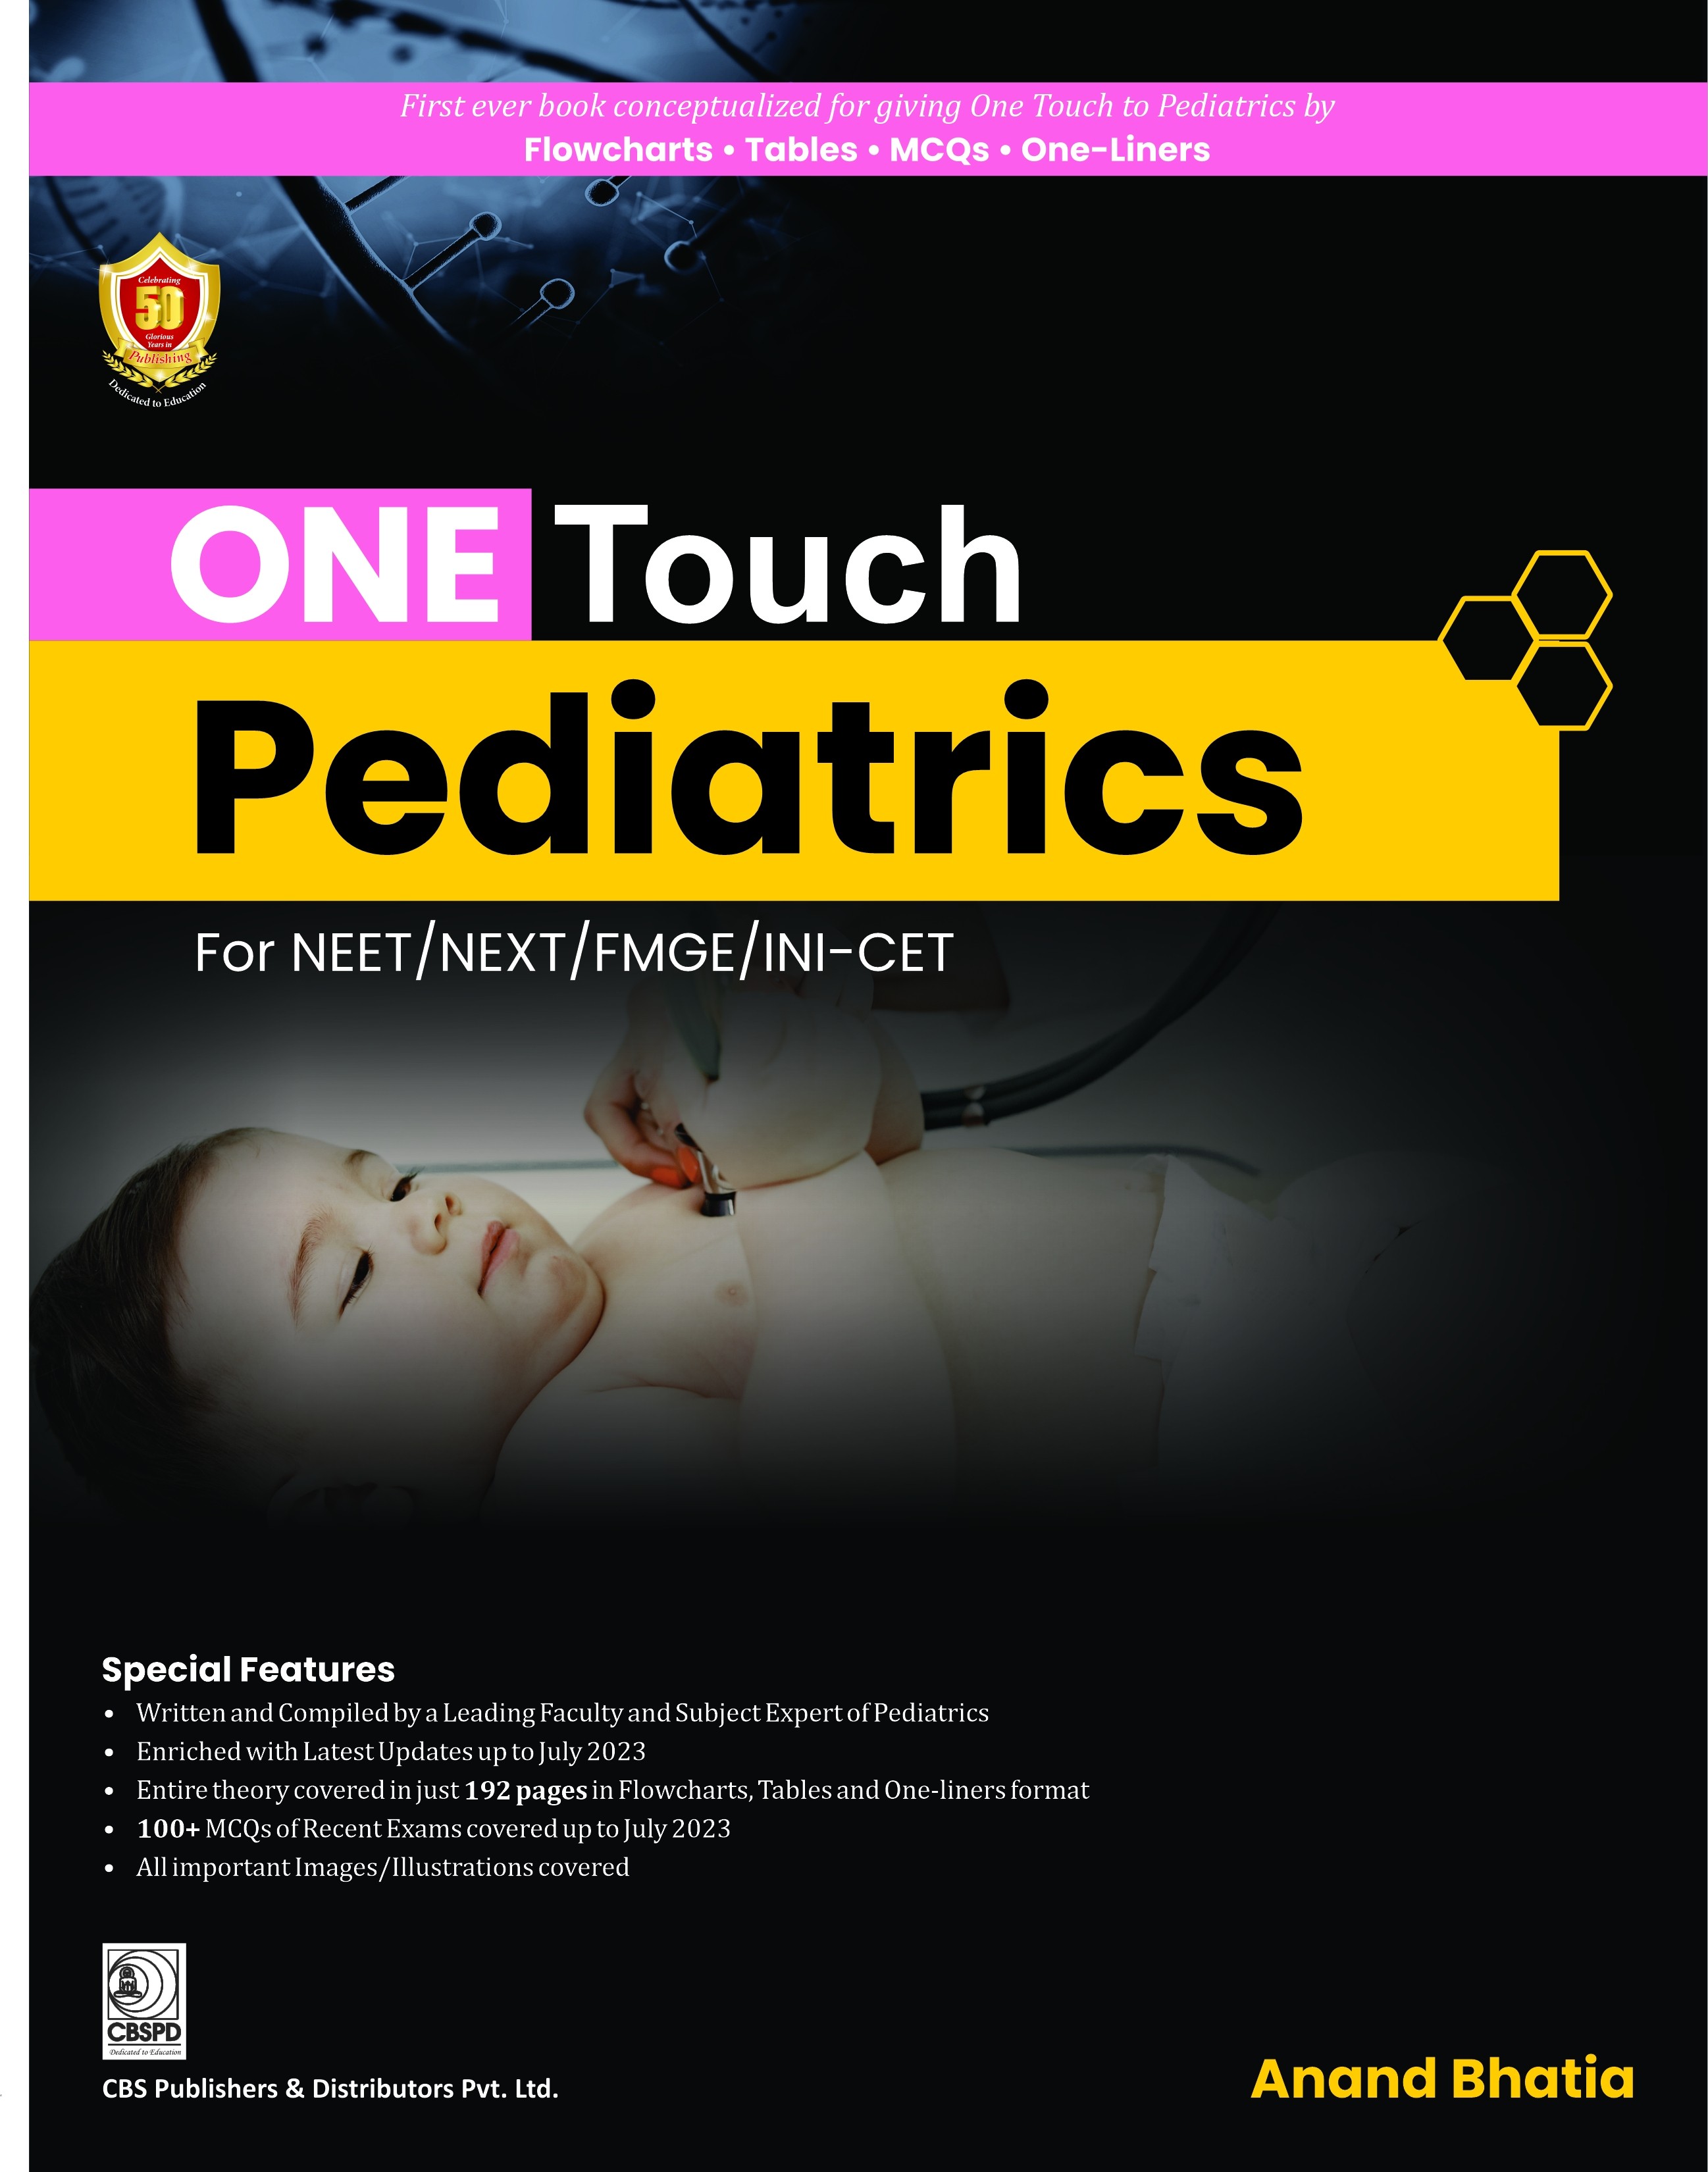 ONE TOUCH Pediatrics for NEET/NEXT/FMGE/INI-CET